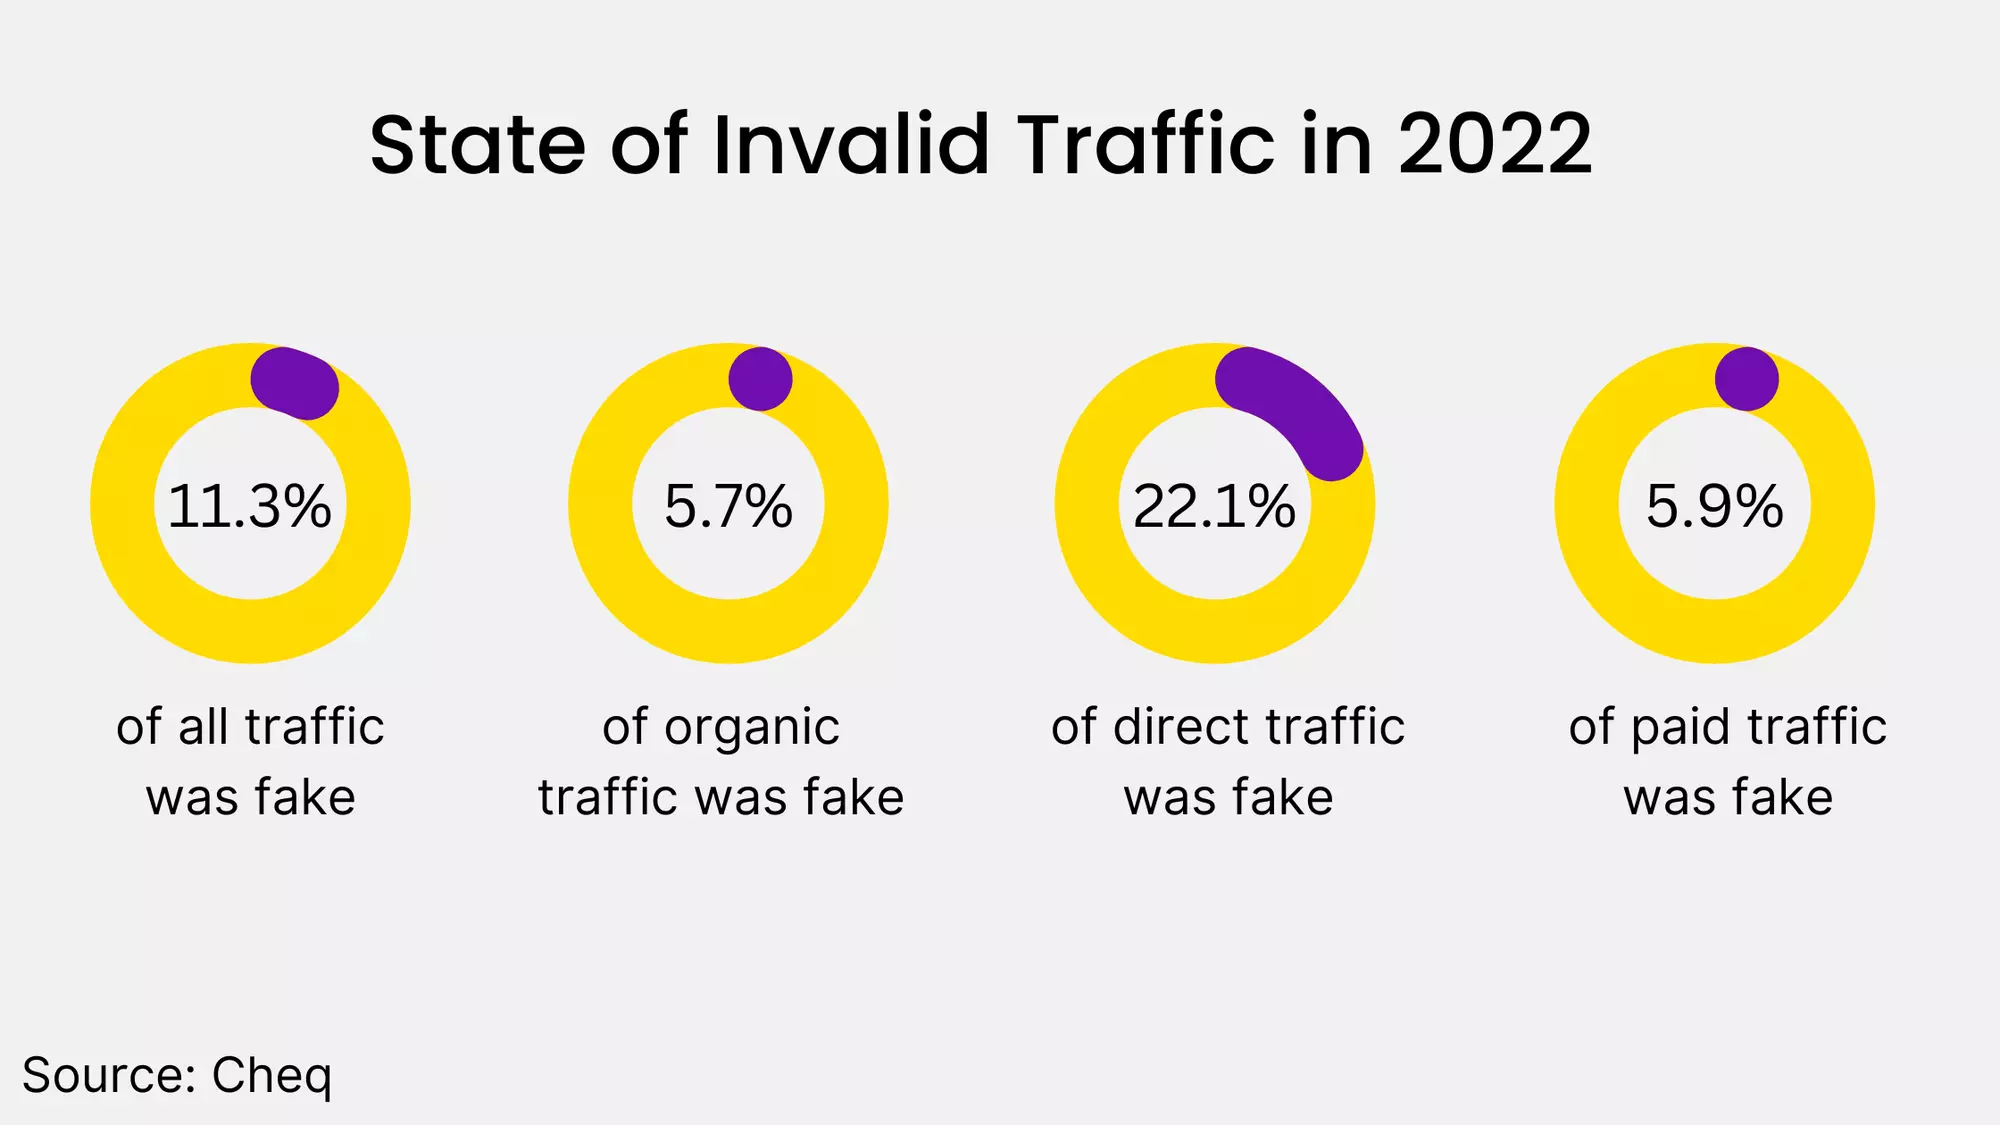 State of Invalid Traffic in 2022